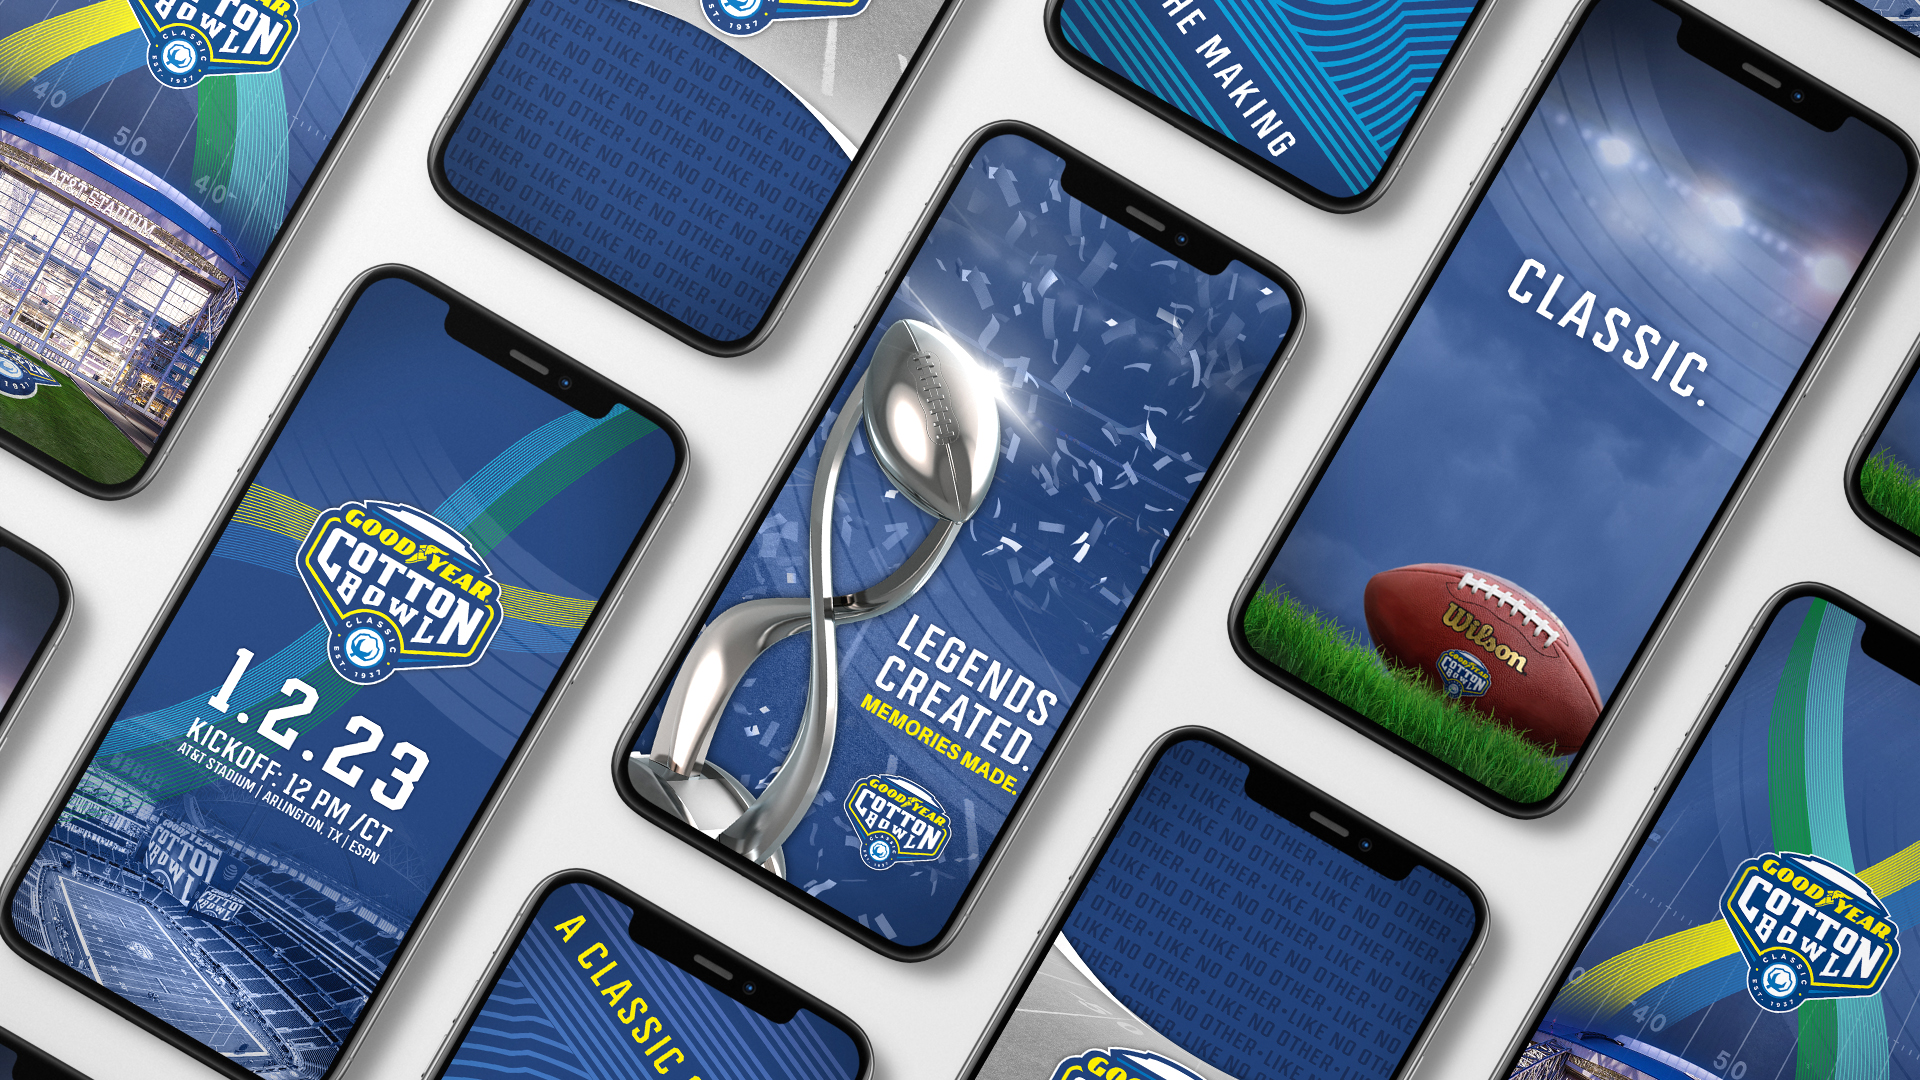 Cotton Bowl Phone Wallpapers